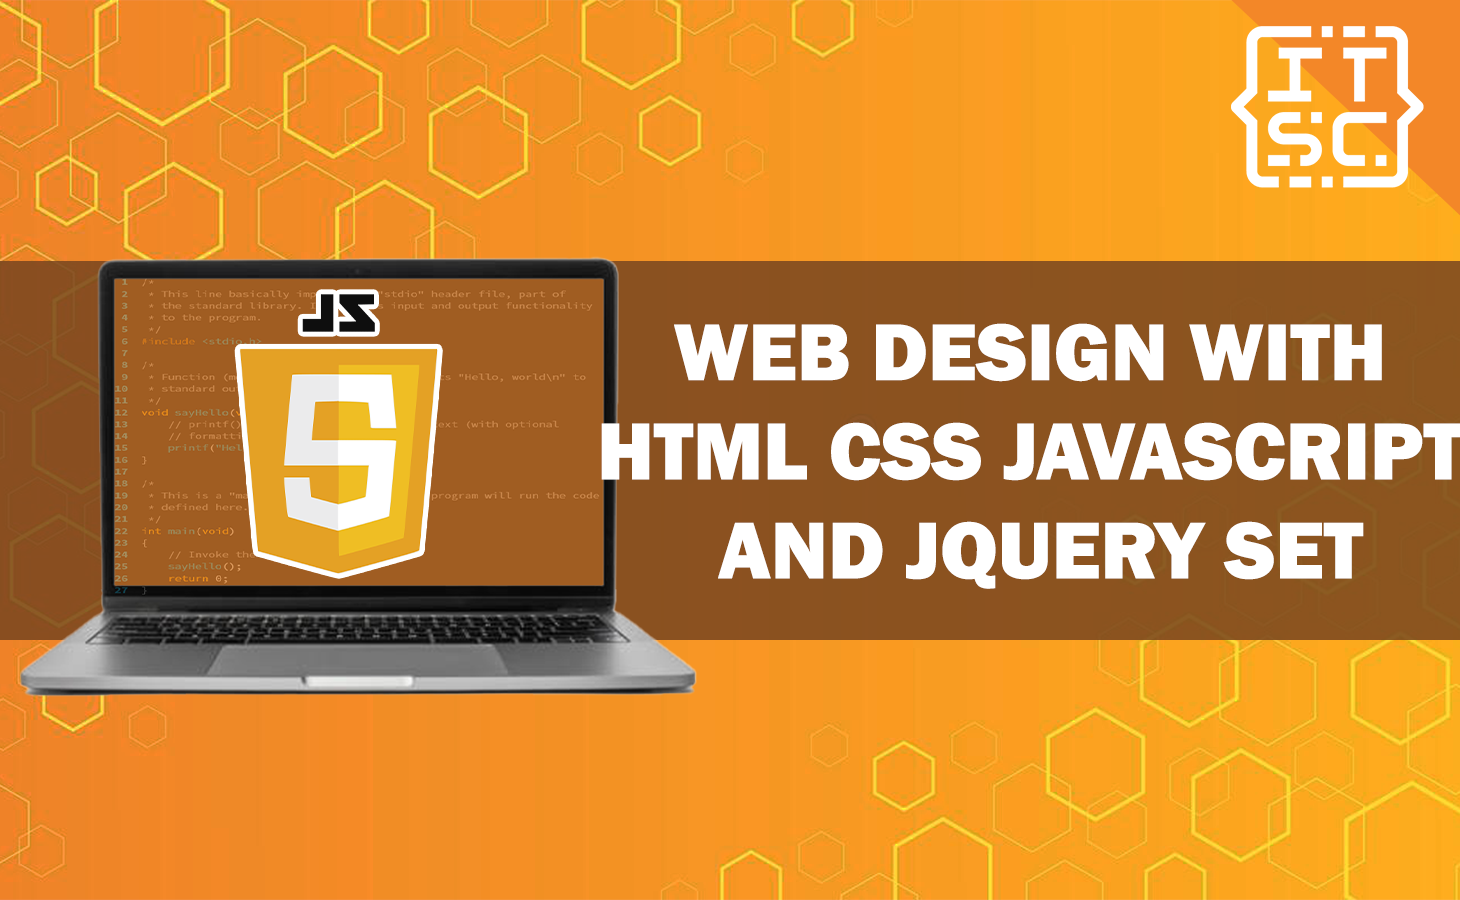 Web Design with HTML CSS JavaScript and jQuery Set